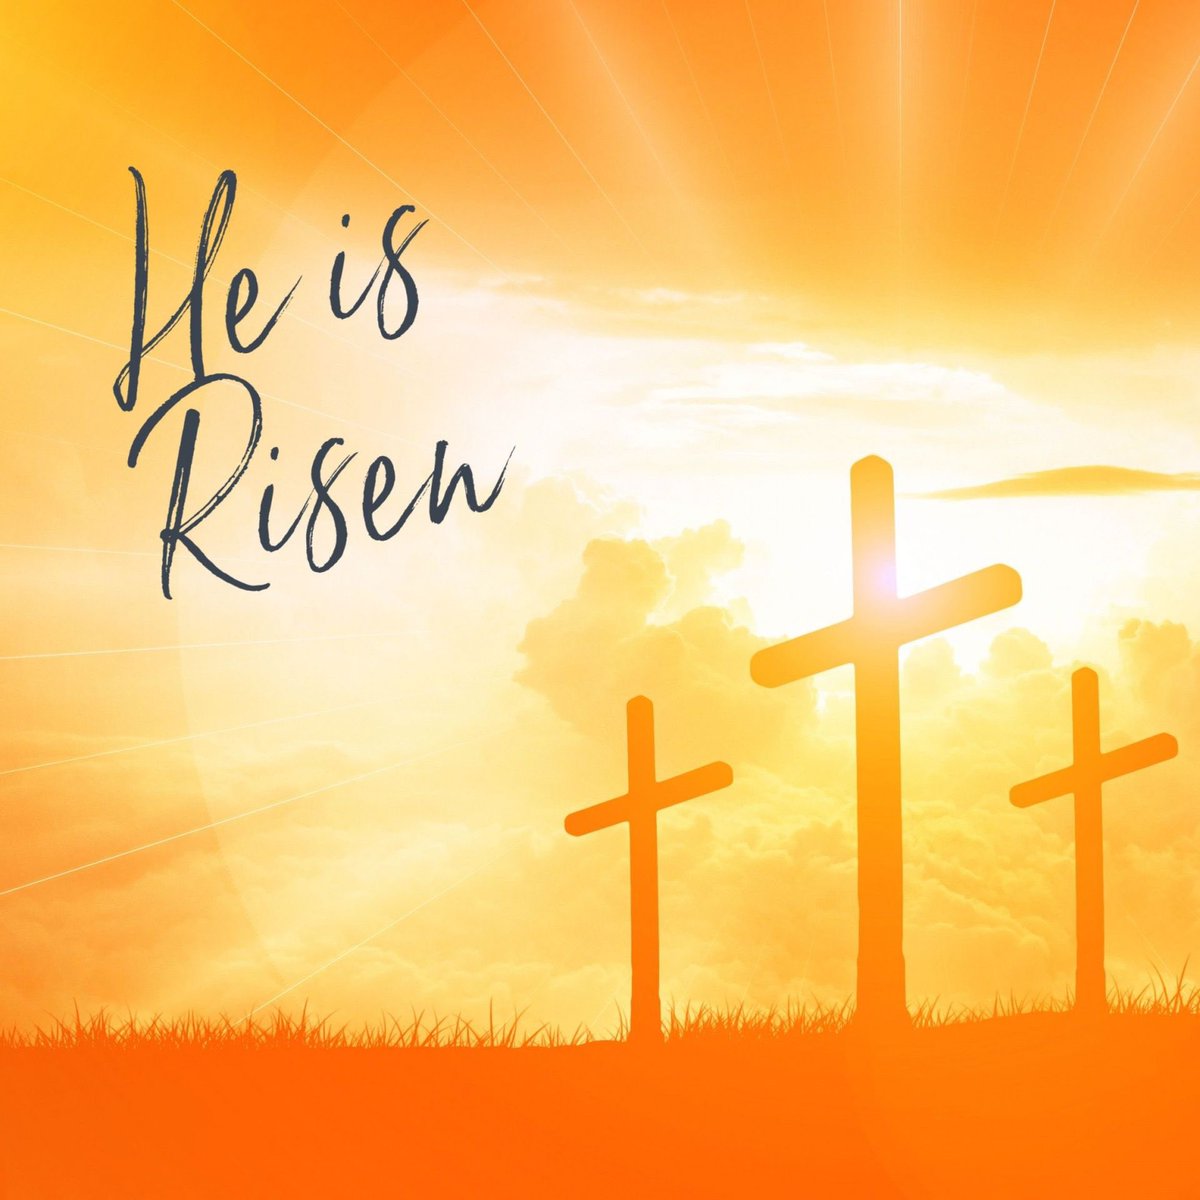 Wishing you and your family a blessed Easter Sunday! ✝️ #HeIsRisen